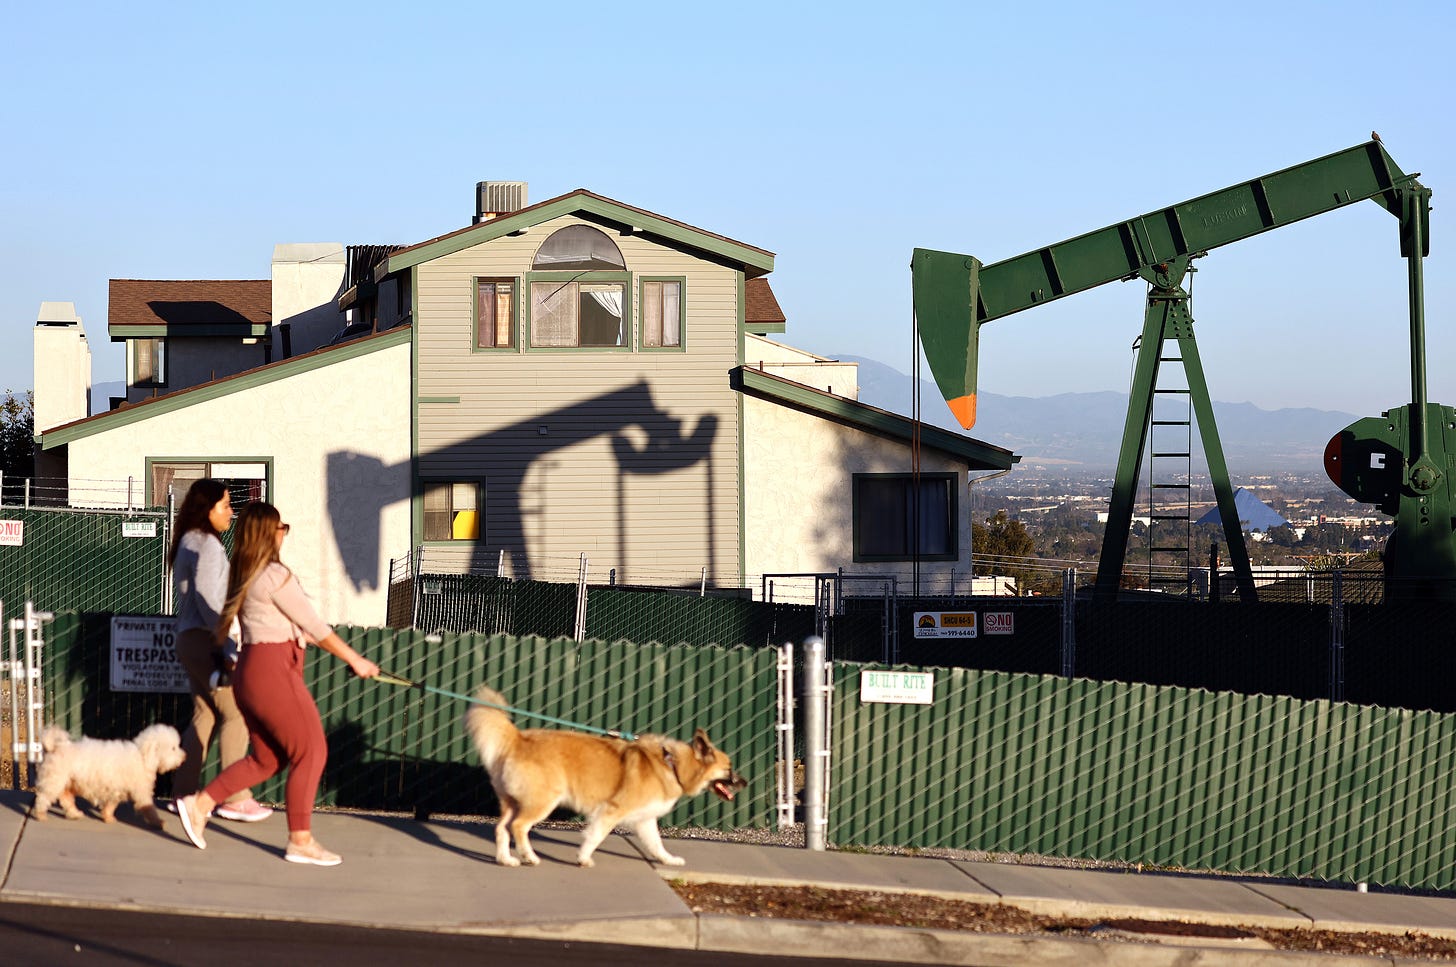 An oil pumpjack stands idle near homes in February 2023 in Signal Hill, California. The production of oil and natural gas in the U.S. soared to record heights within the past year. Credit: Mario Tama/Getty Images